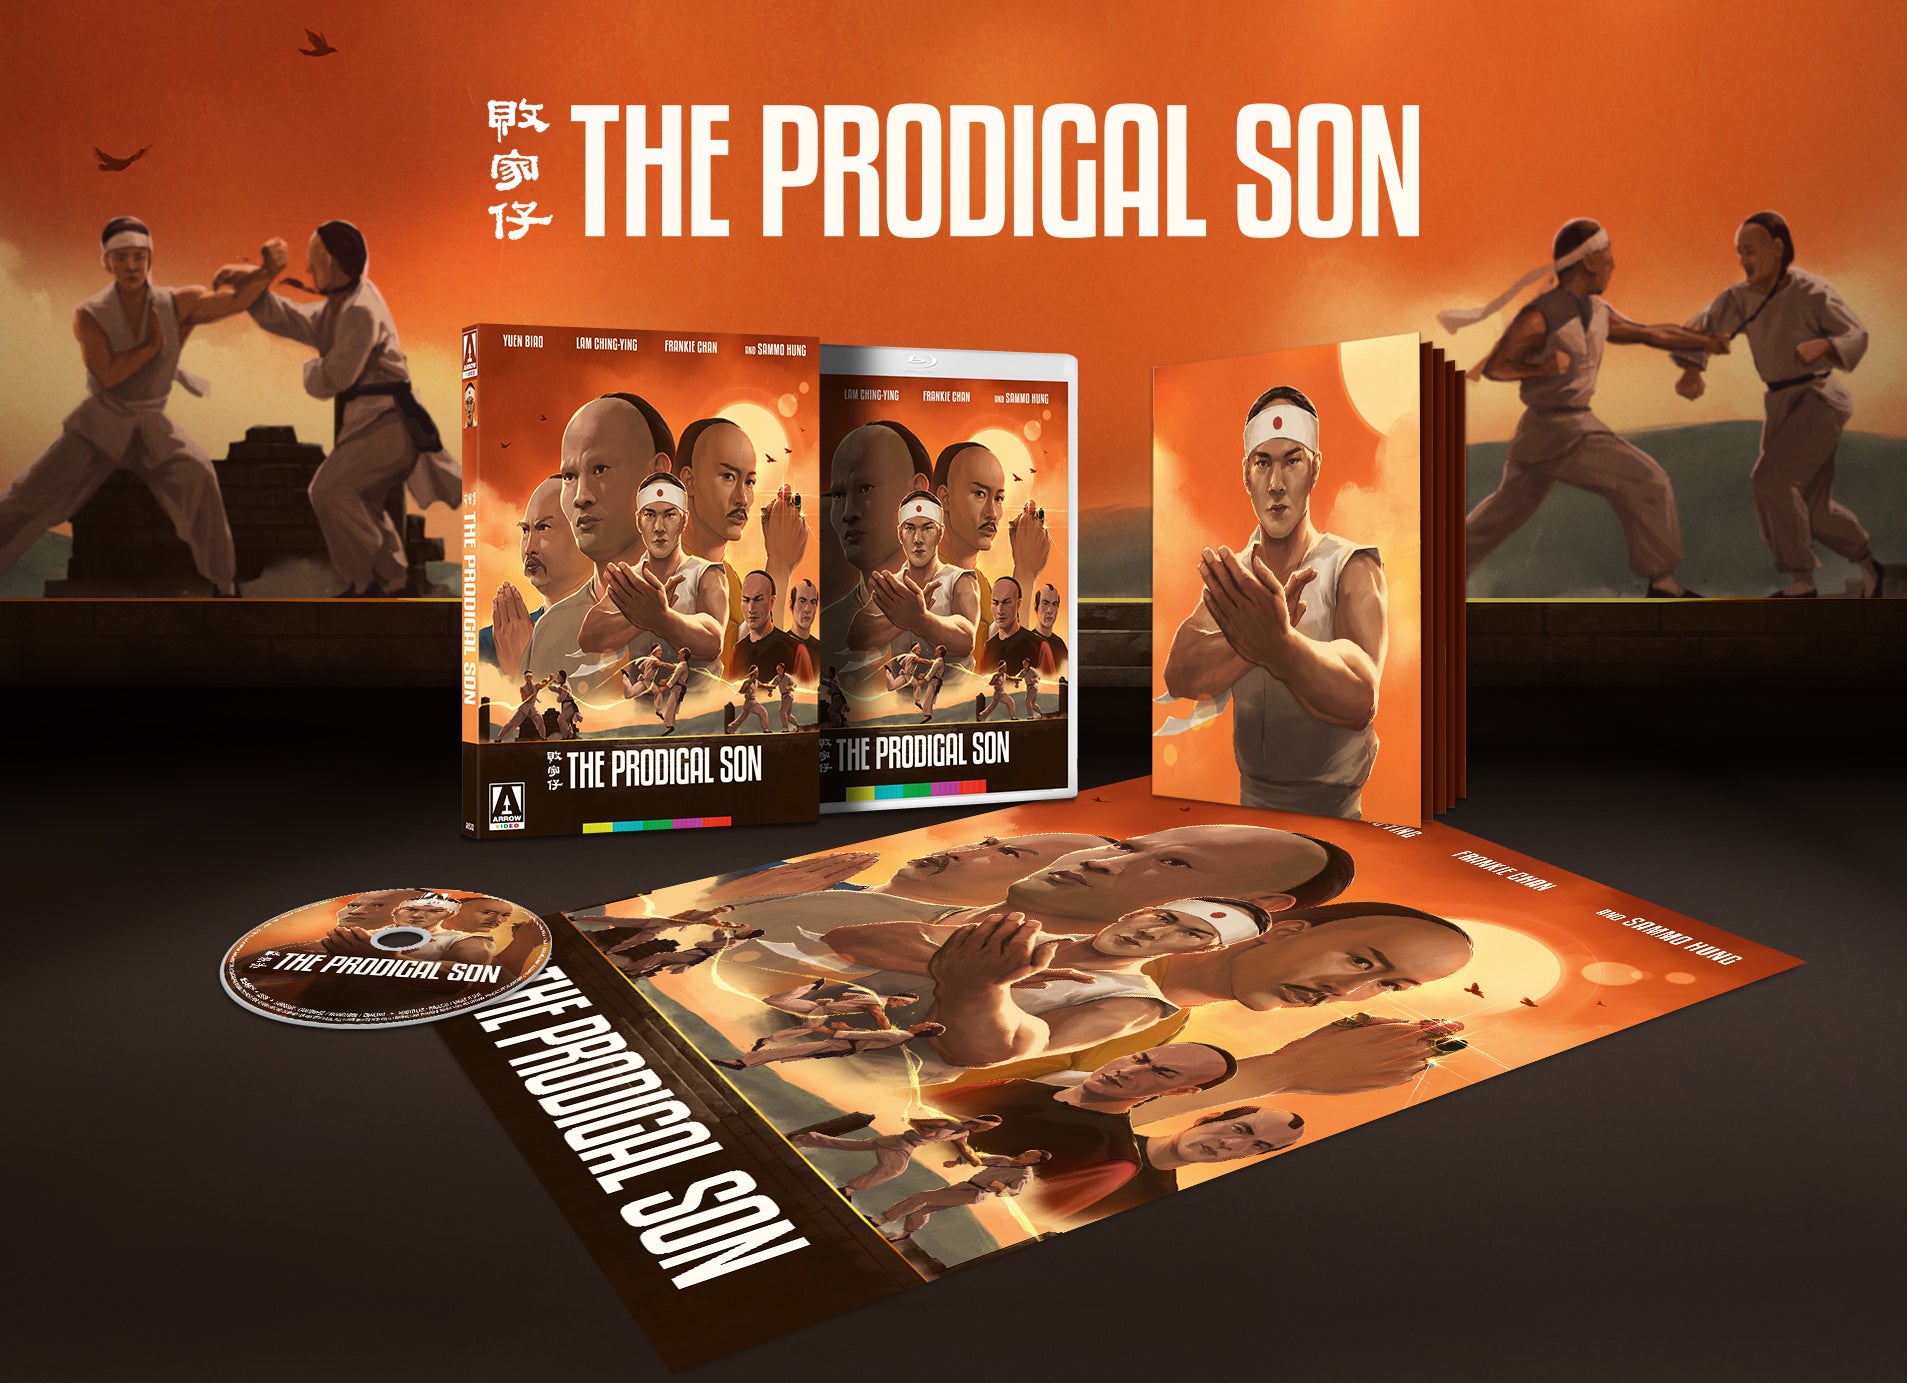 THE PRODIGAL SON (LIMITED EDITION) BLU-RAY